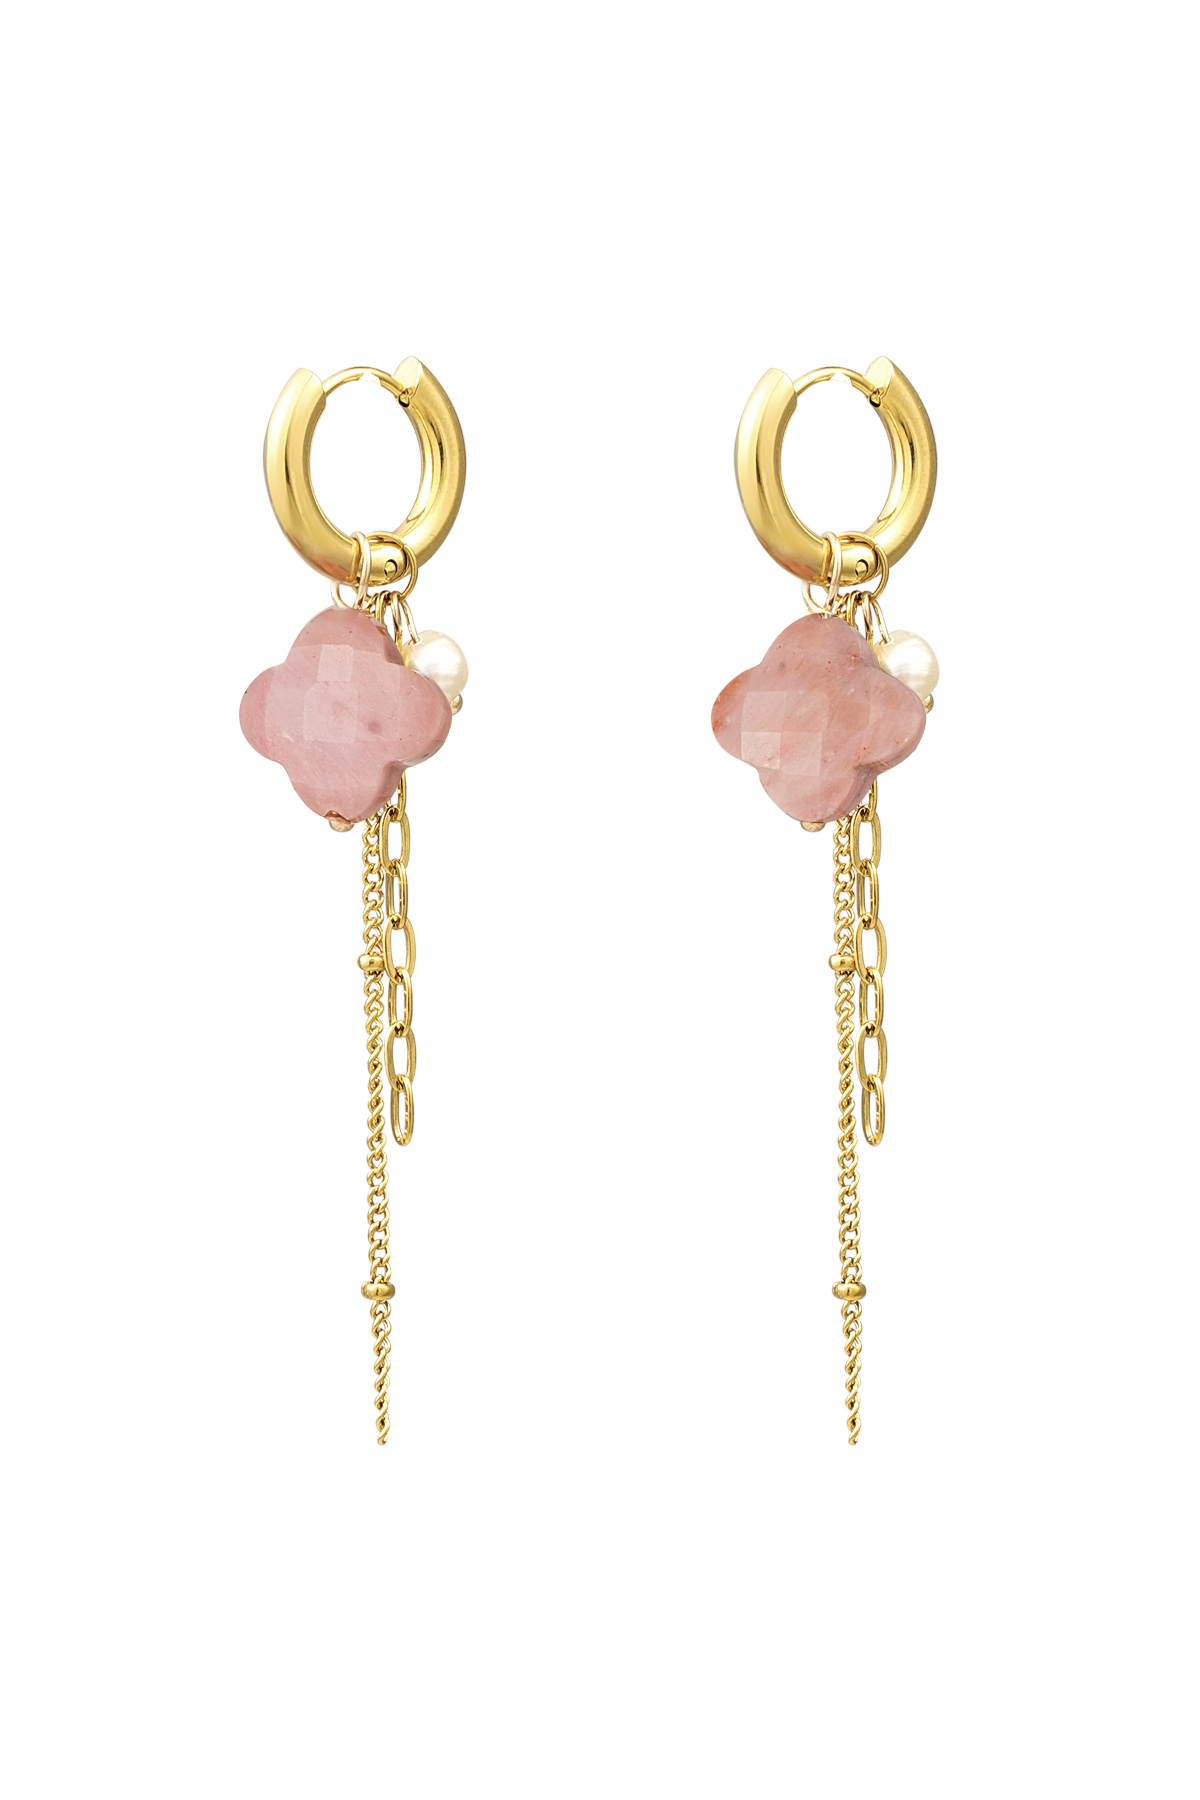 Clover earrings with chains - gold/light pink h5 